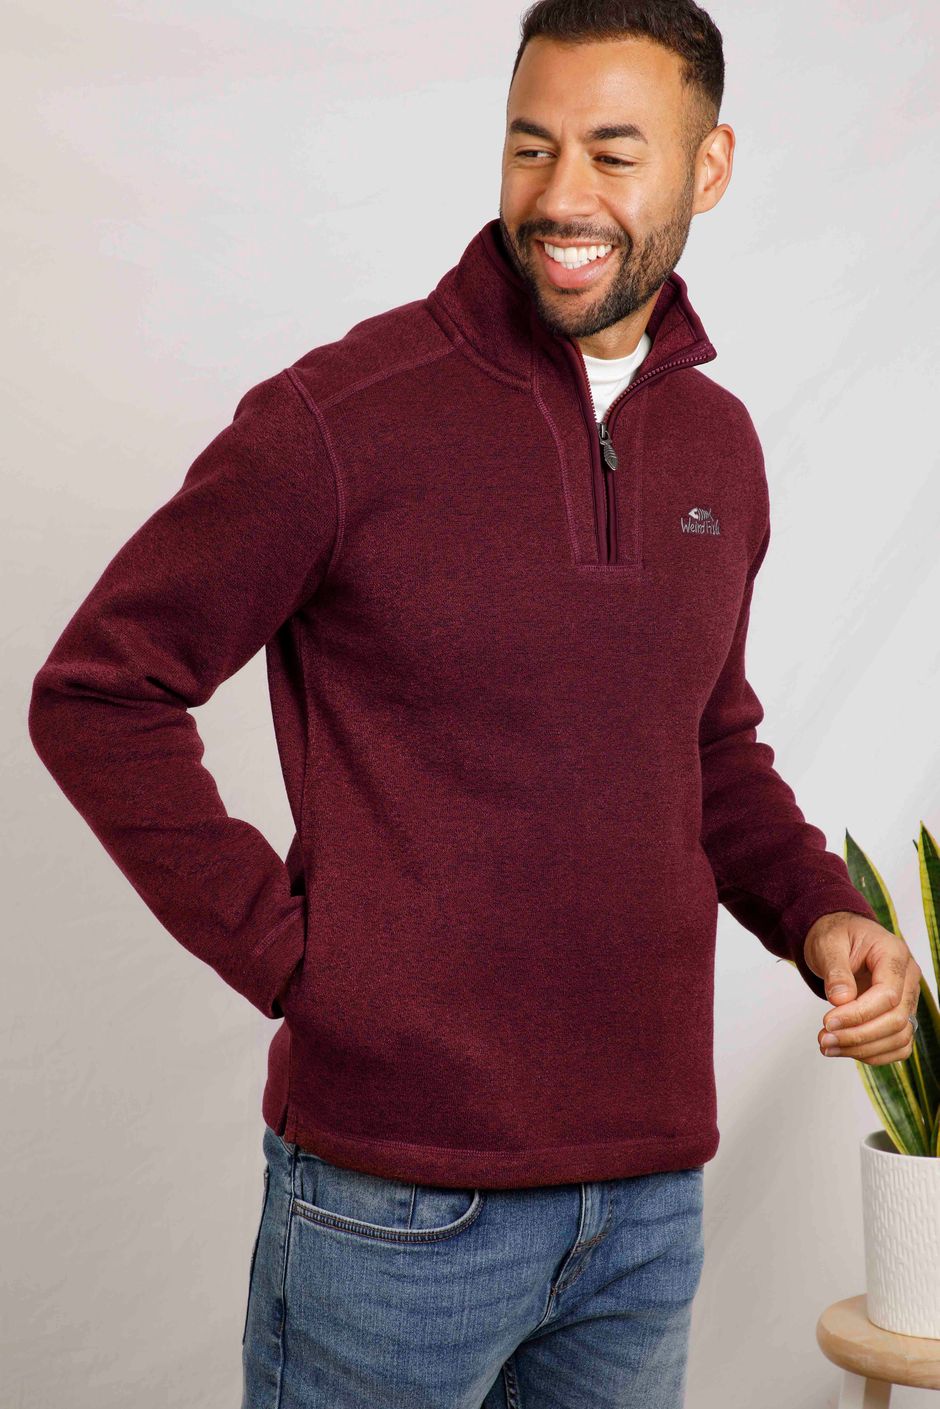 Stowe Recycled 1/4 Zip Soft Knit Antique Cherry